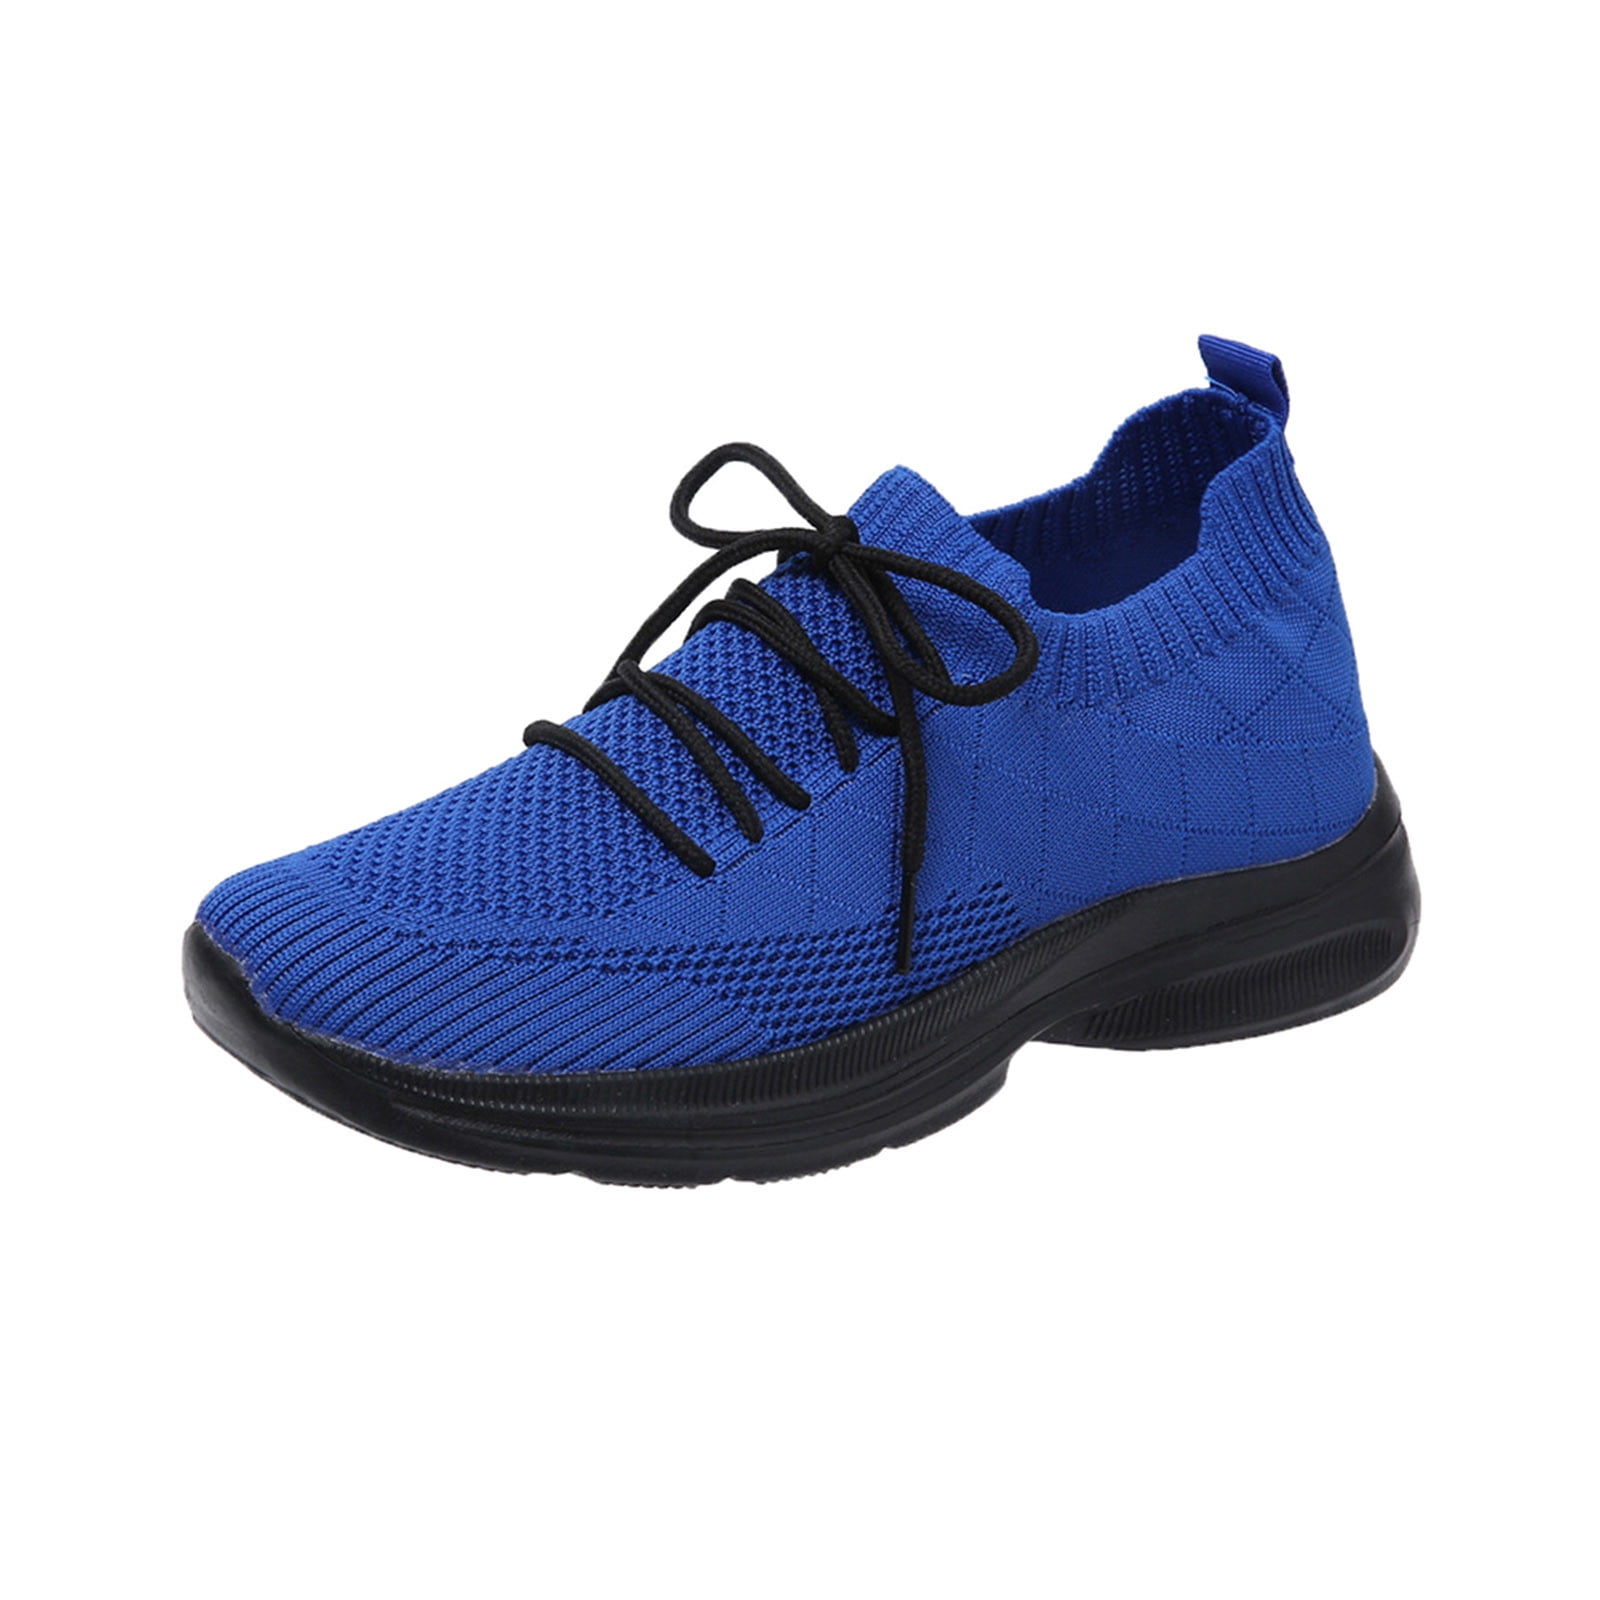 Blue Solid Color Men's Sneakers, Modern Minimalist High Top Tennis Shoes  For Stylish Men | Stylish tennis shoes, Men's high top sneakers, High top  tennis shoes